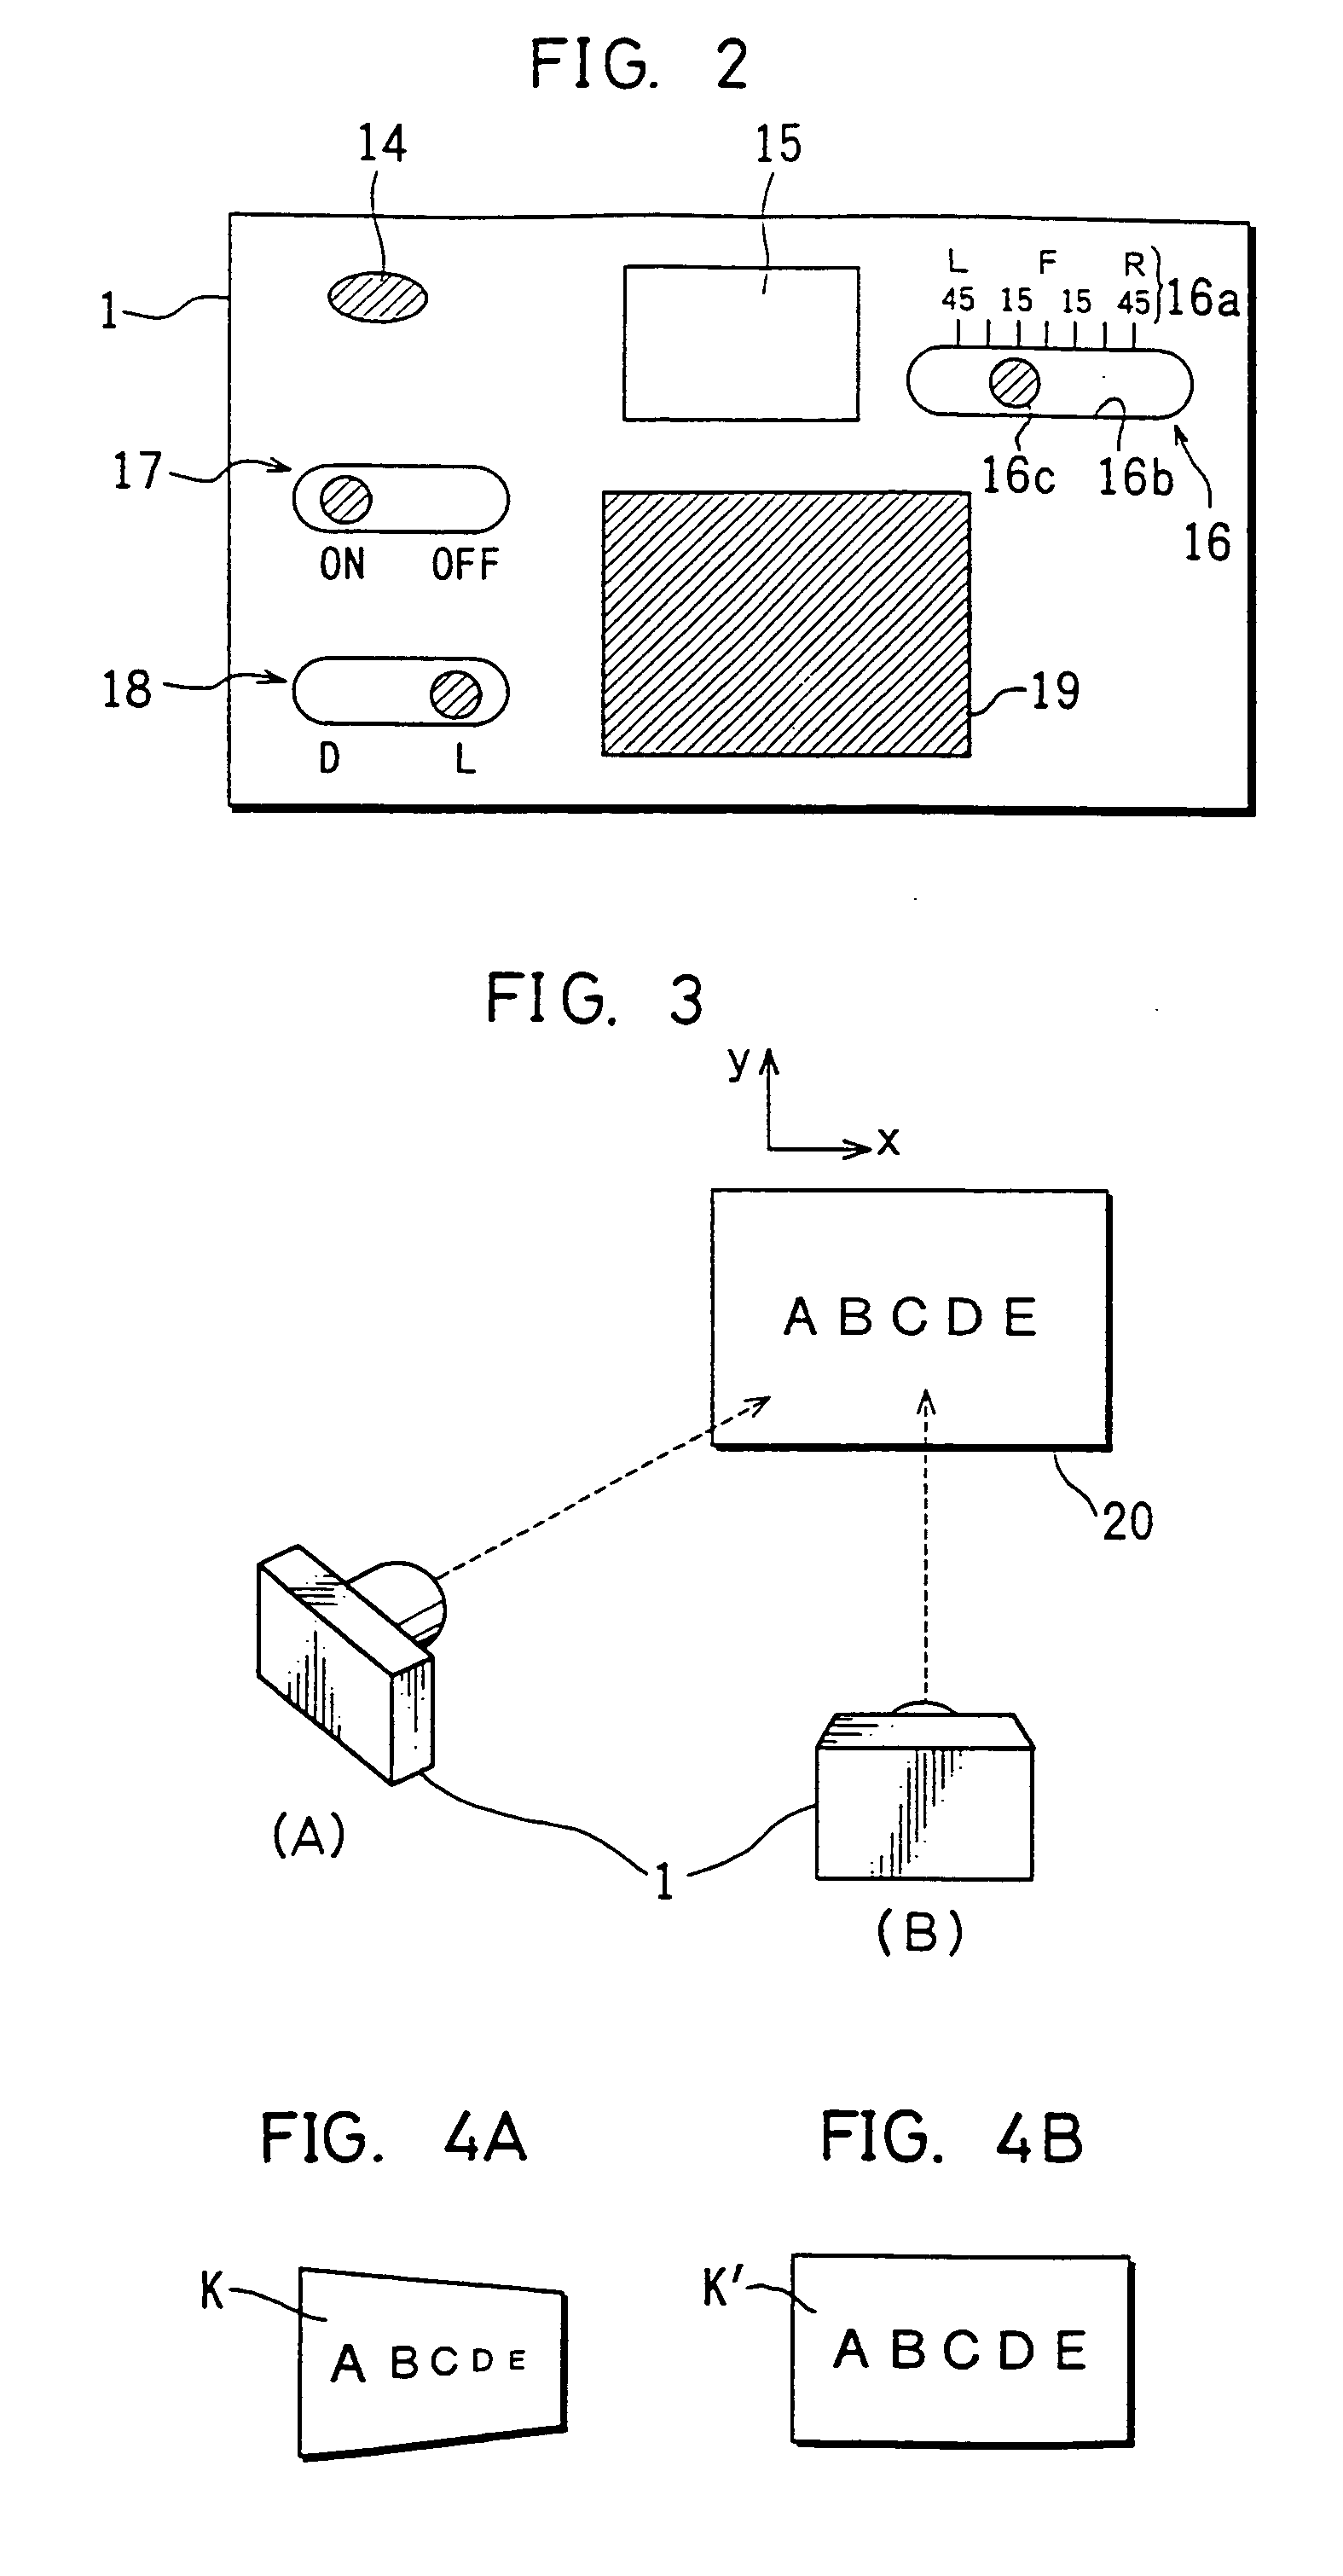 Image capturing apparatus provided with image processor